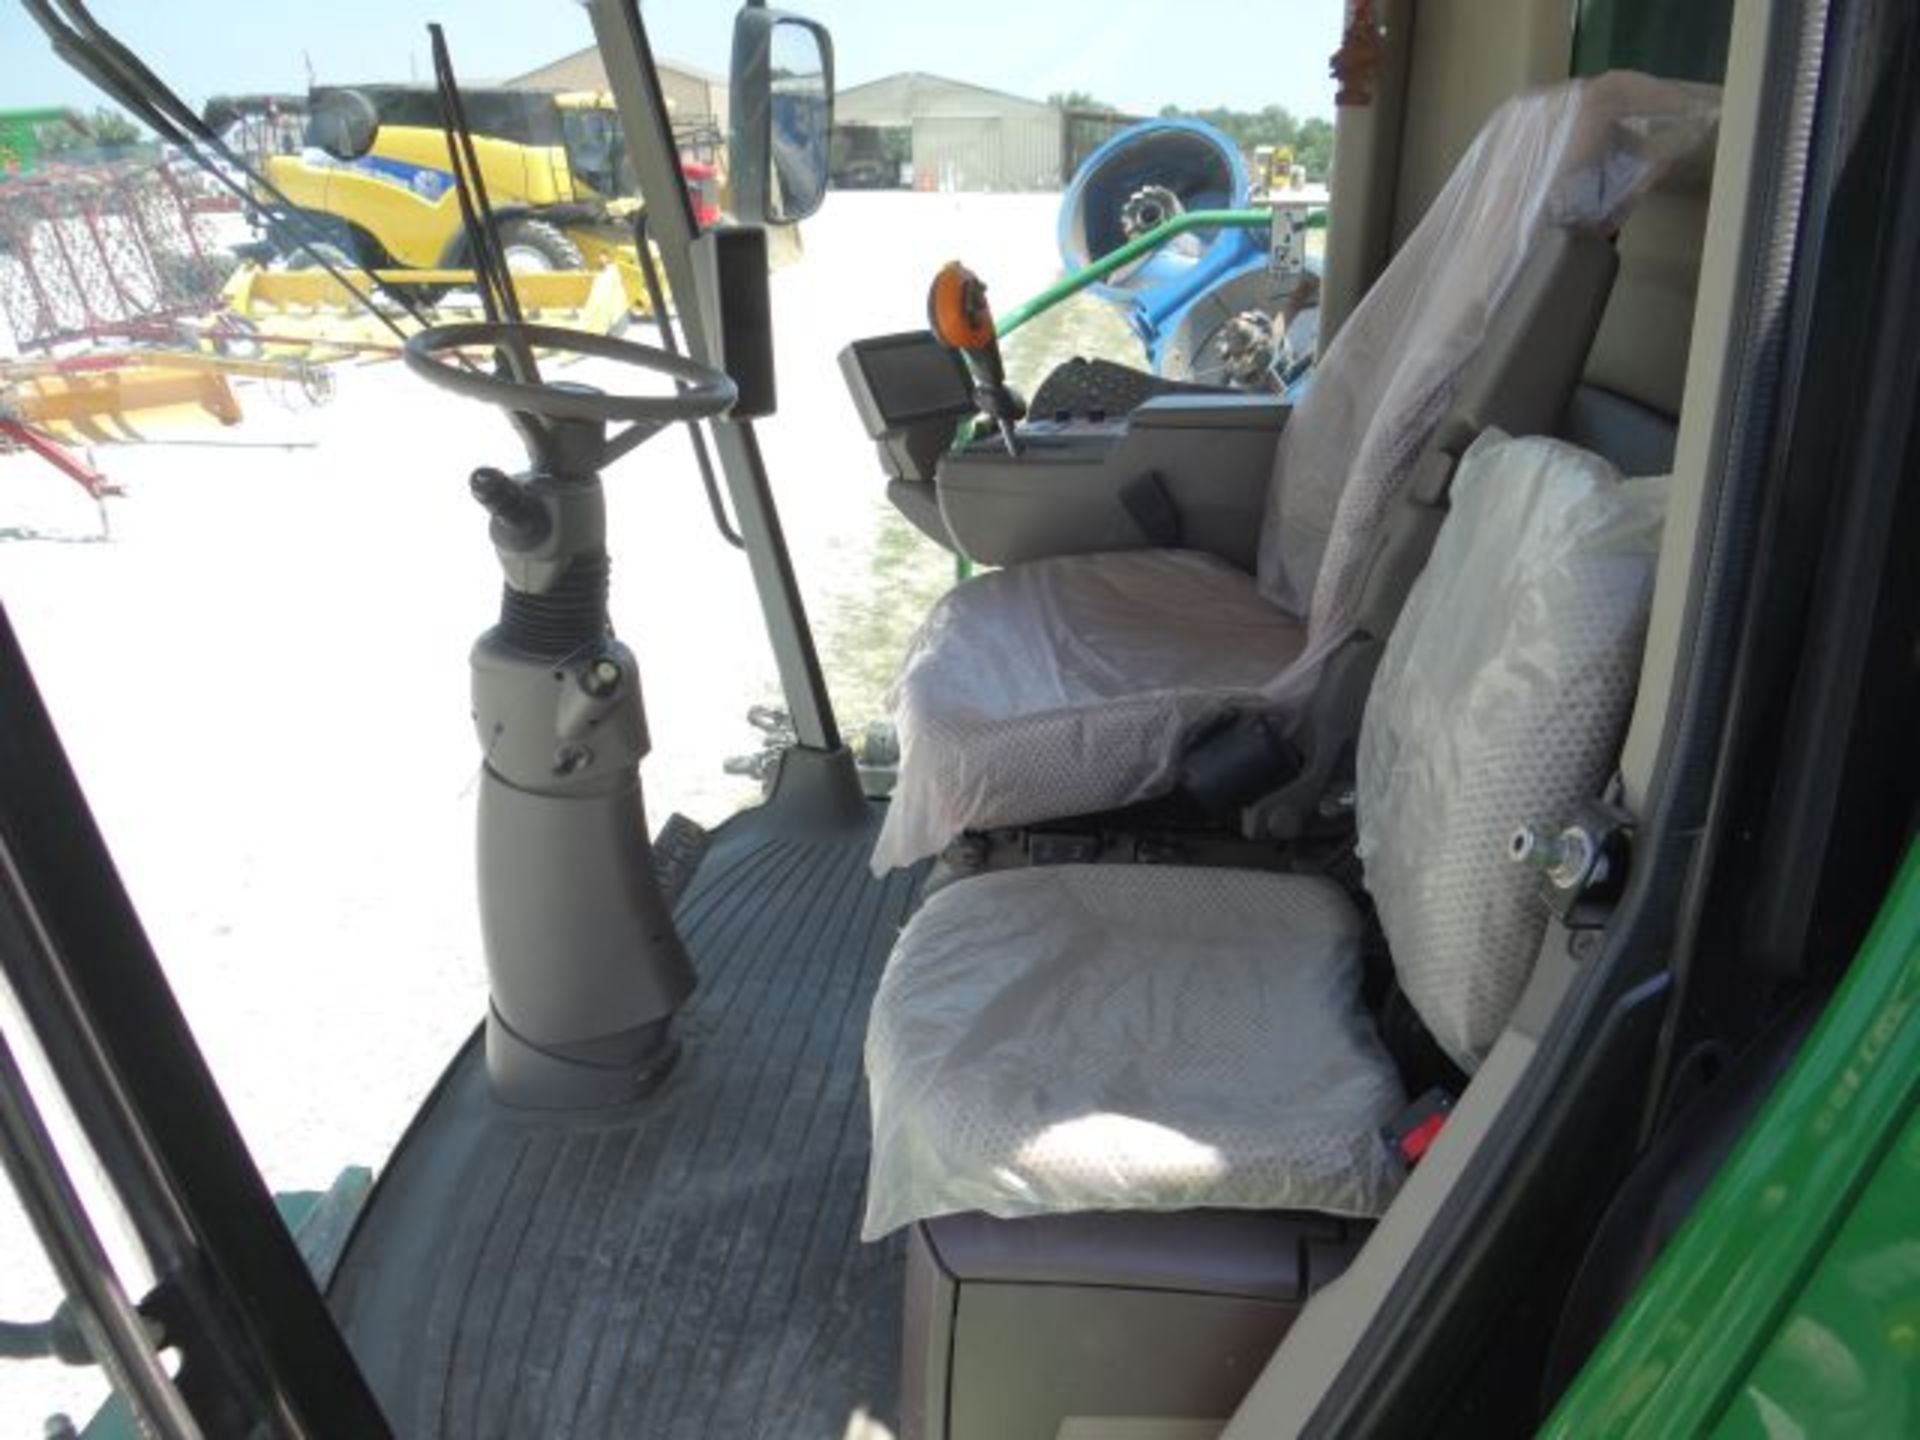 JD S680 Combine, 2012 #150819, 1299/956 hrs, PRWD, CM, Yield Monitor, Yield Mapping, Long - Image 5 of 6